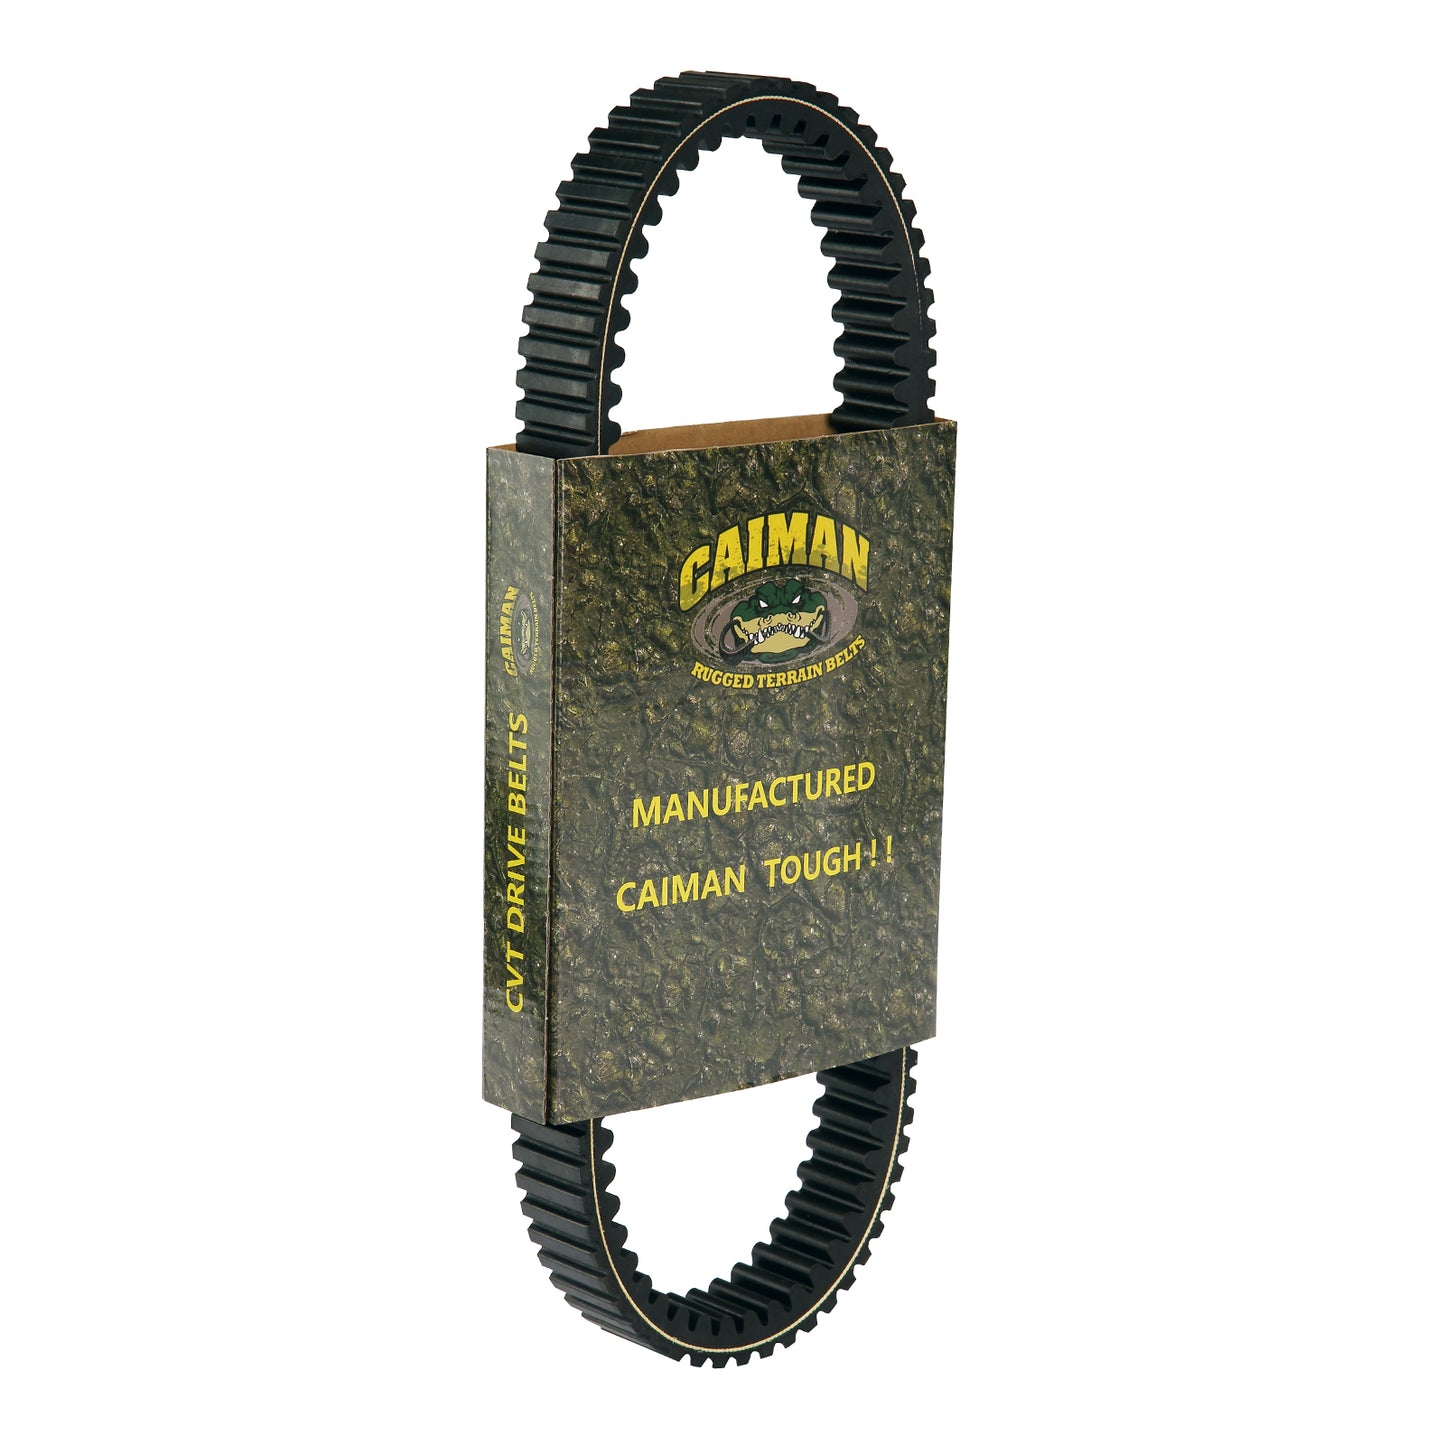 CAM-49VS4266 Can Am Belt Drive Belts for for 2021 Can-Am Commander Max 1000R XT 1000R DPS 1000R XT 1000R XT-P Max 1000R DPS